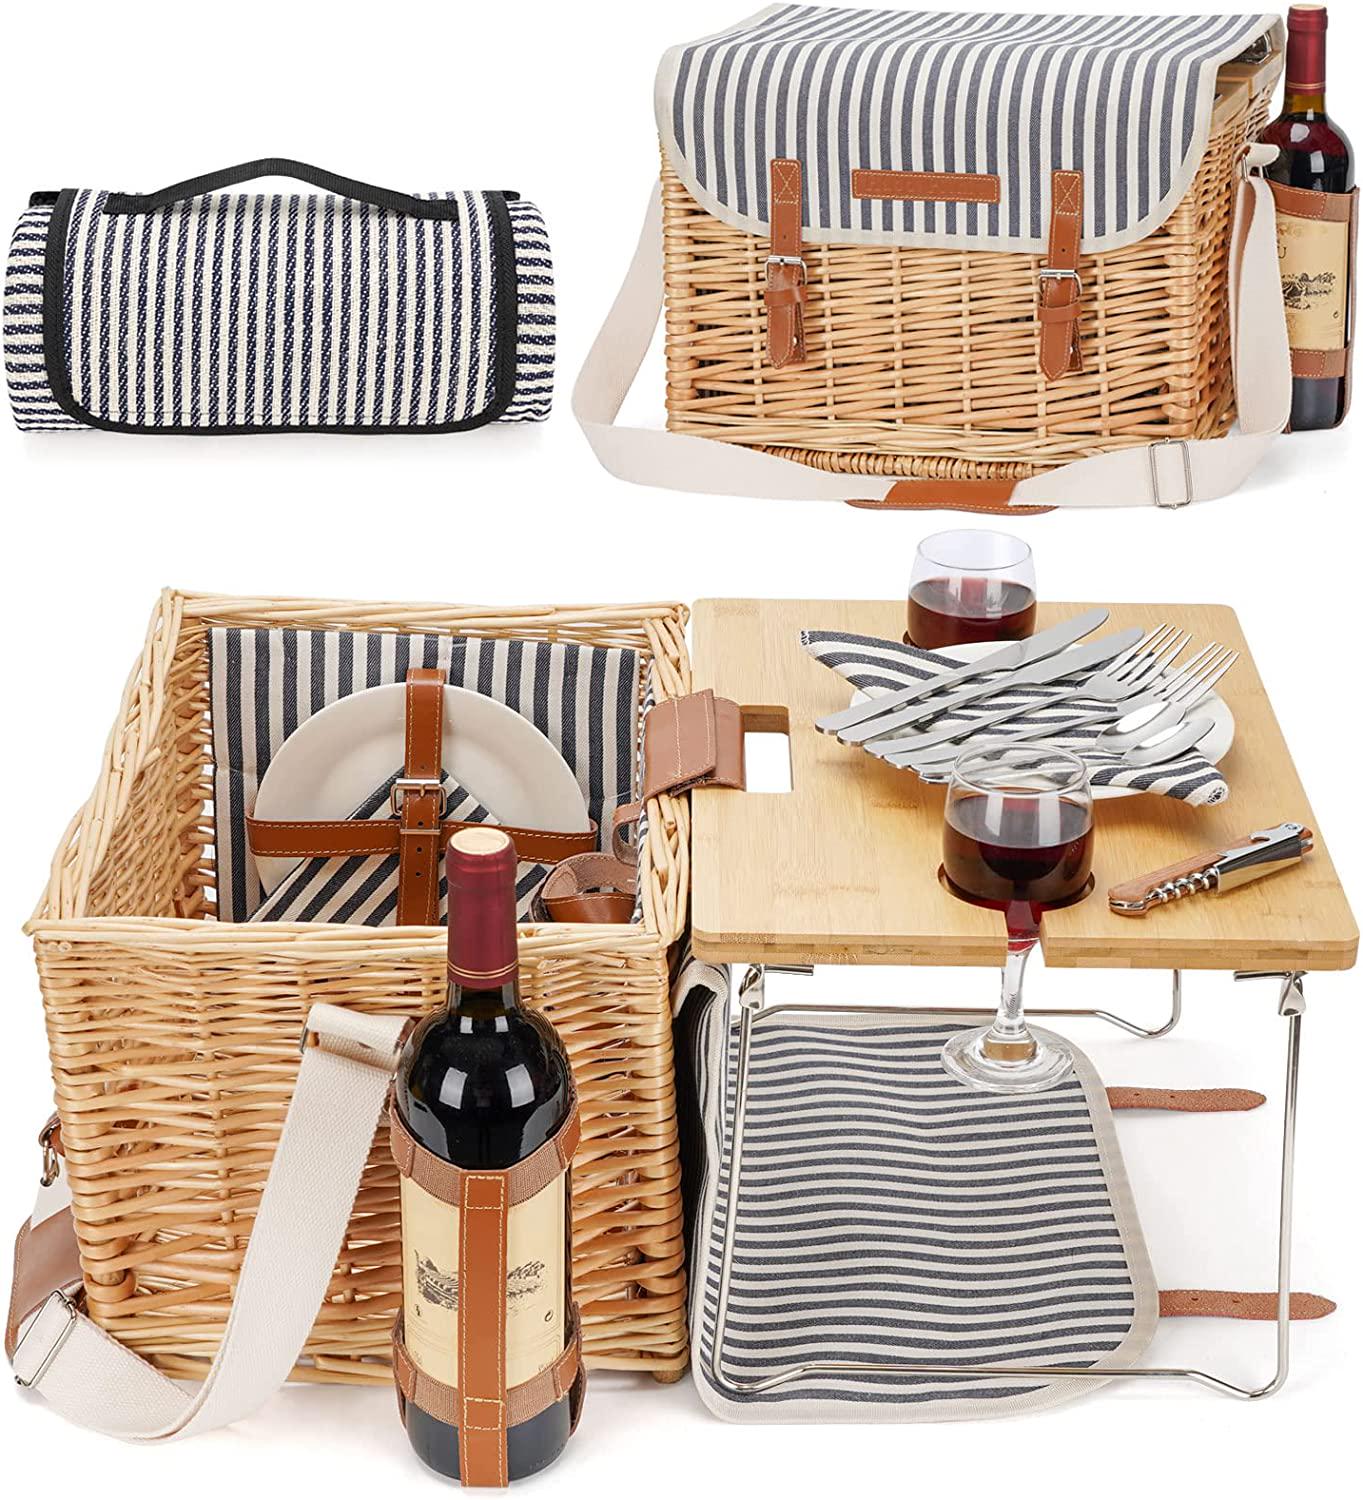 Wicker Picnic Basket for 2 with Detachable Table, Elasticated Wine Holder, Shoulder Carrying Willow Picnic Hamper Set with Premium Tableware and Blanket for Outdoor, Wedding, Anniversary, Birthday Gift-